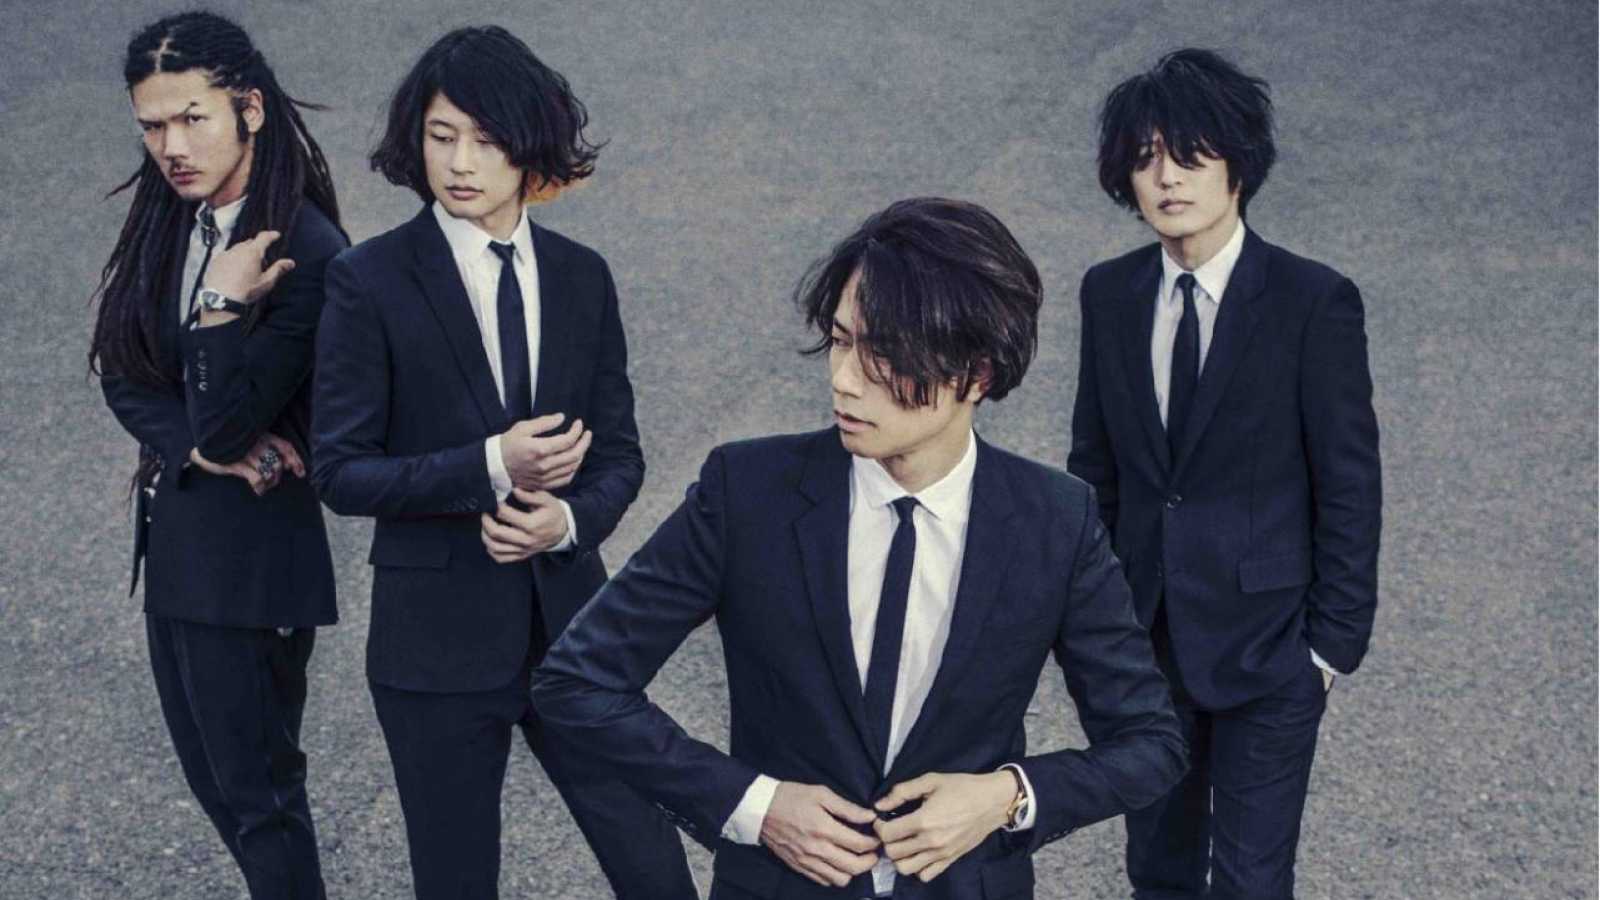 [ALEXANDROS] Unveils Full Music Video for "Tsukiiro Horizon" © 2019 [ALEXANDROS]. All rights reserved.